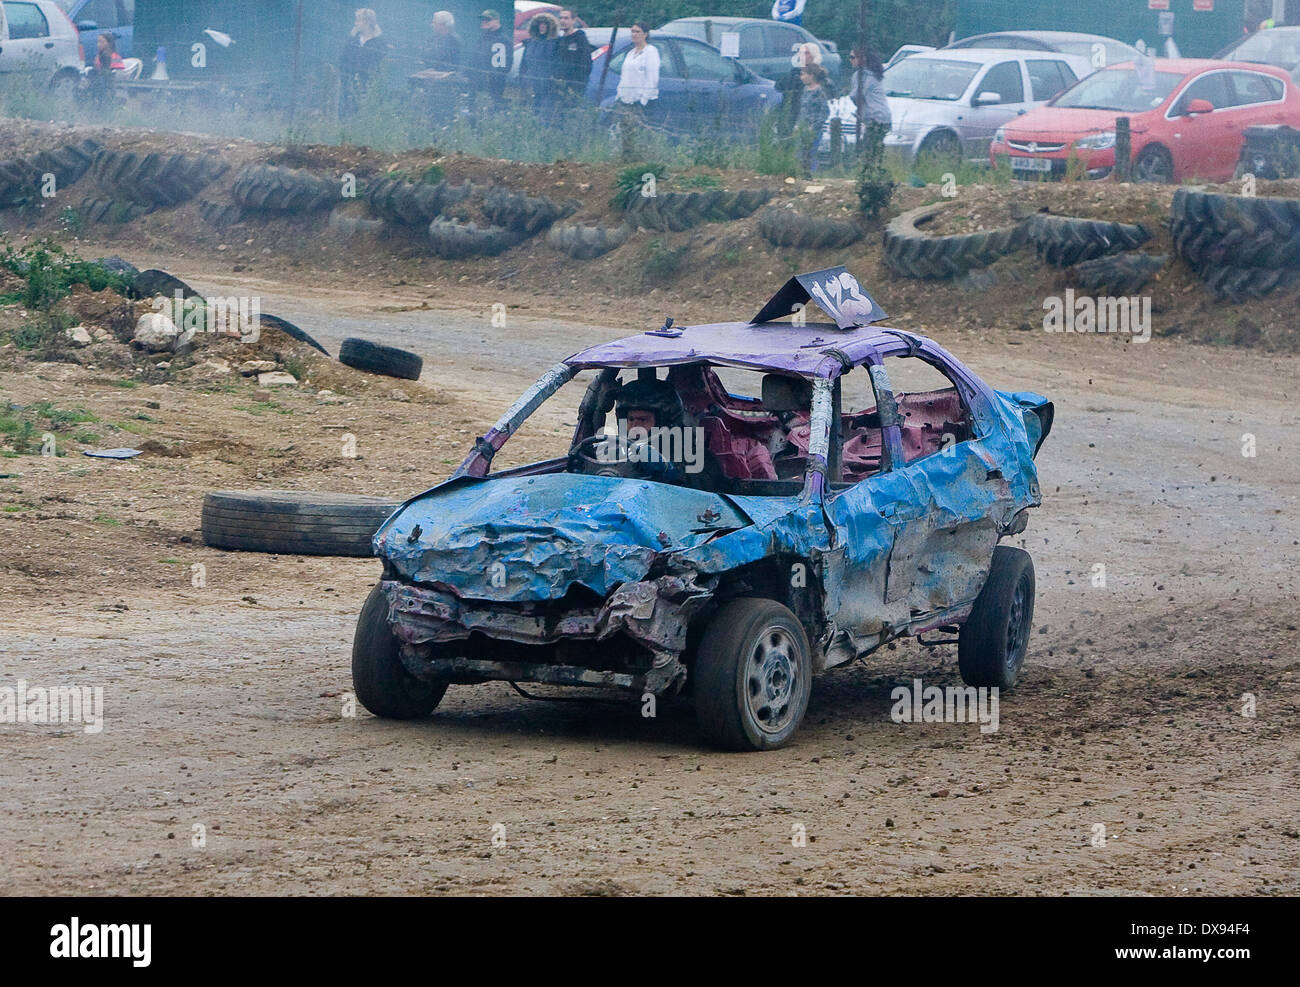 Stansted Raceway Banger Racing Stock Photo